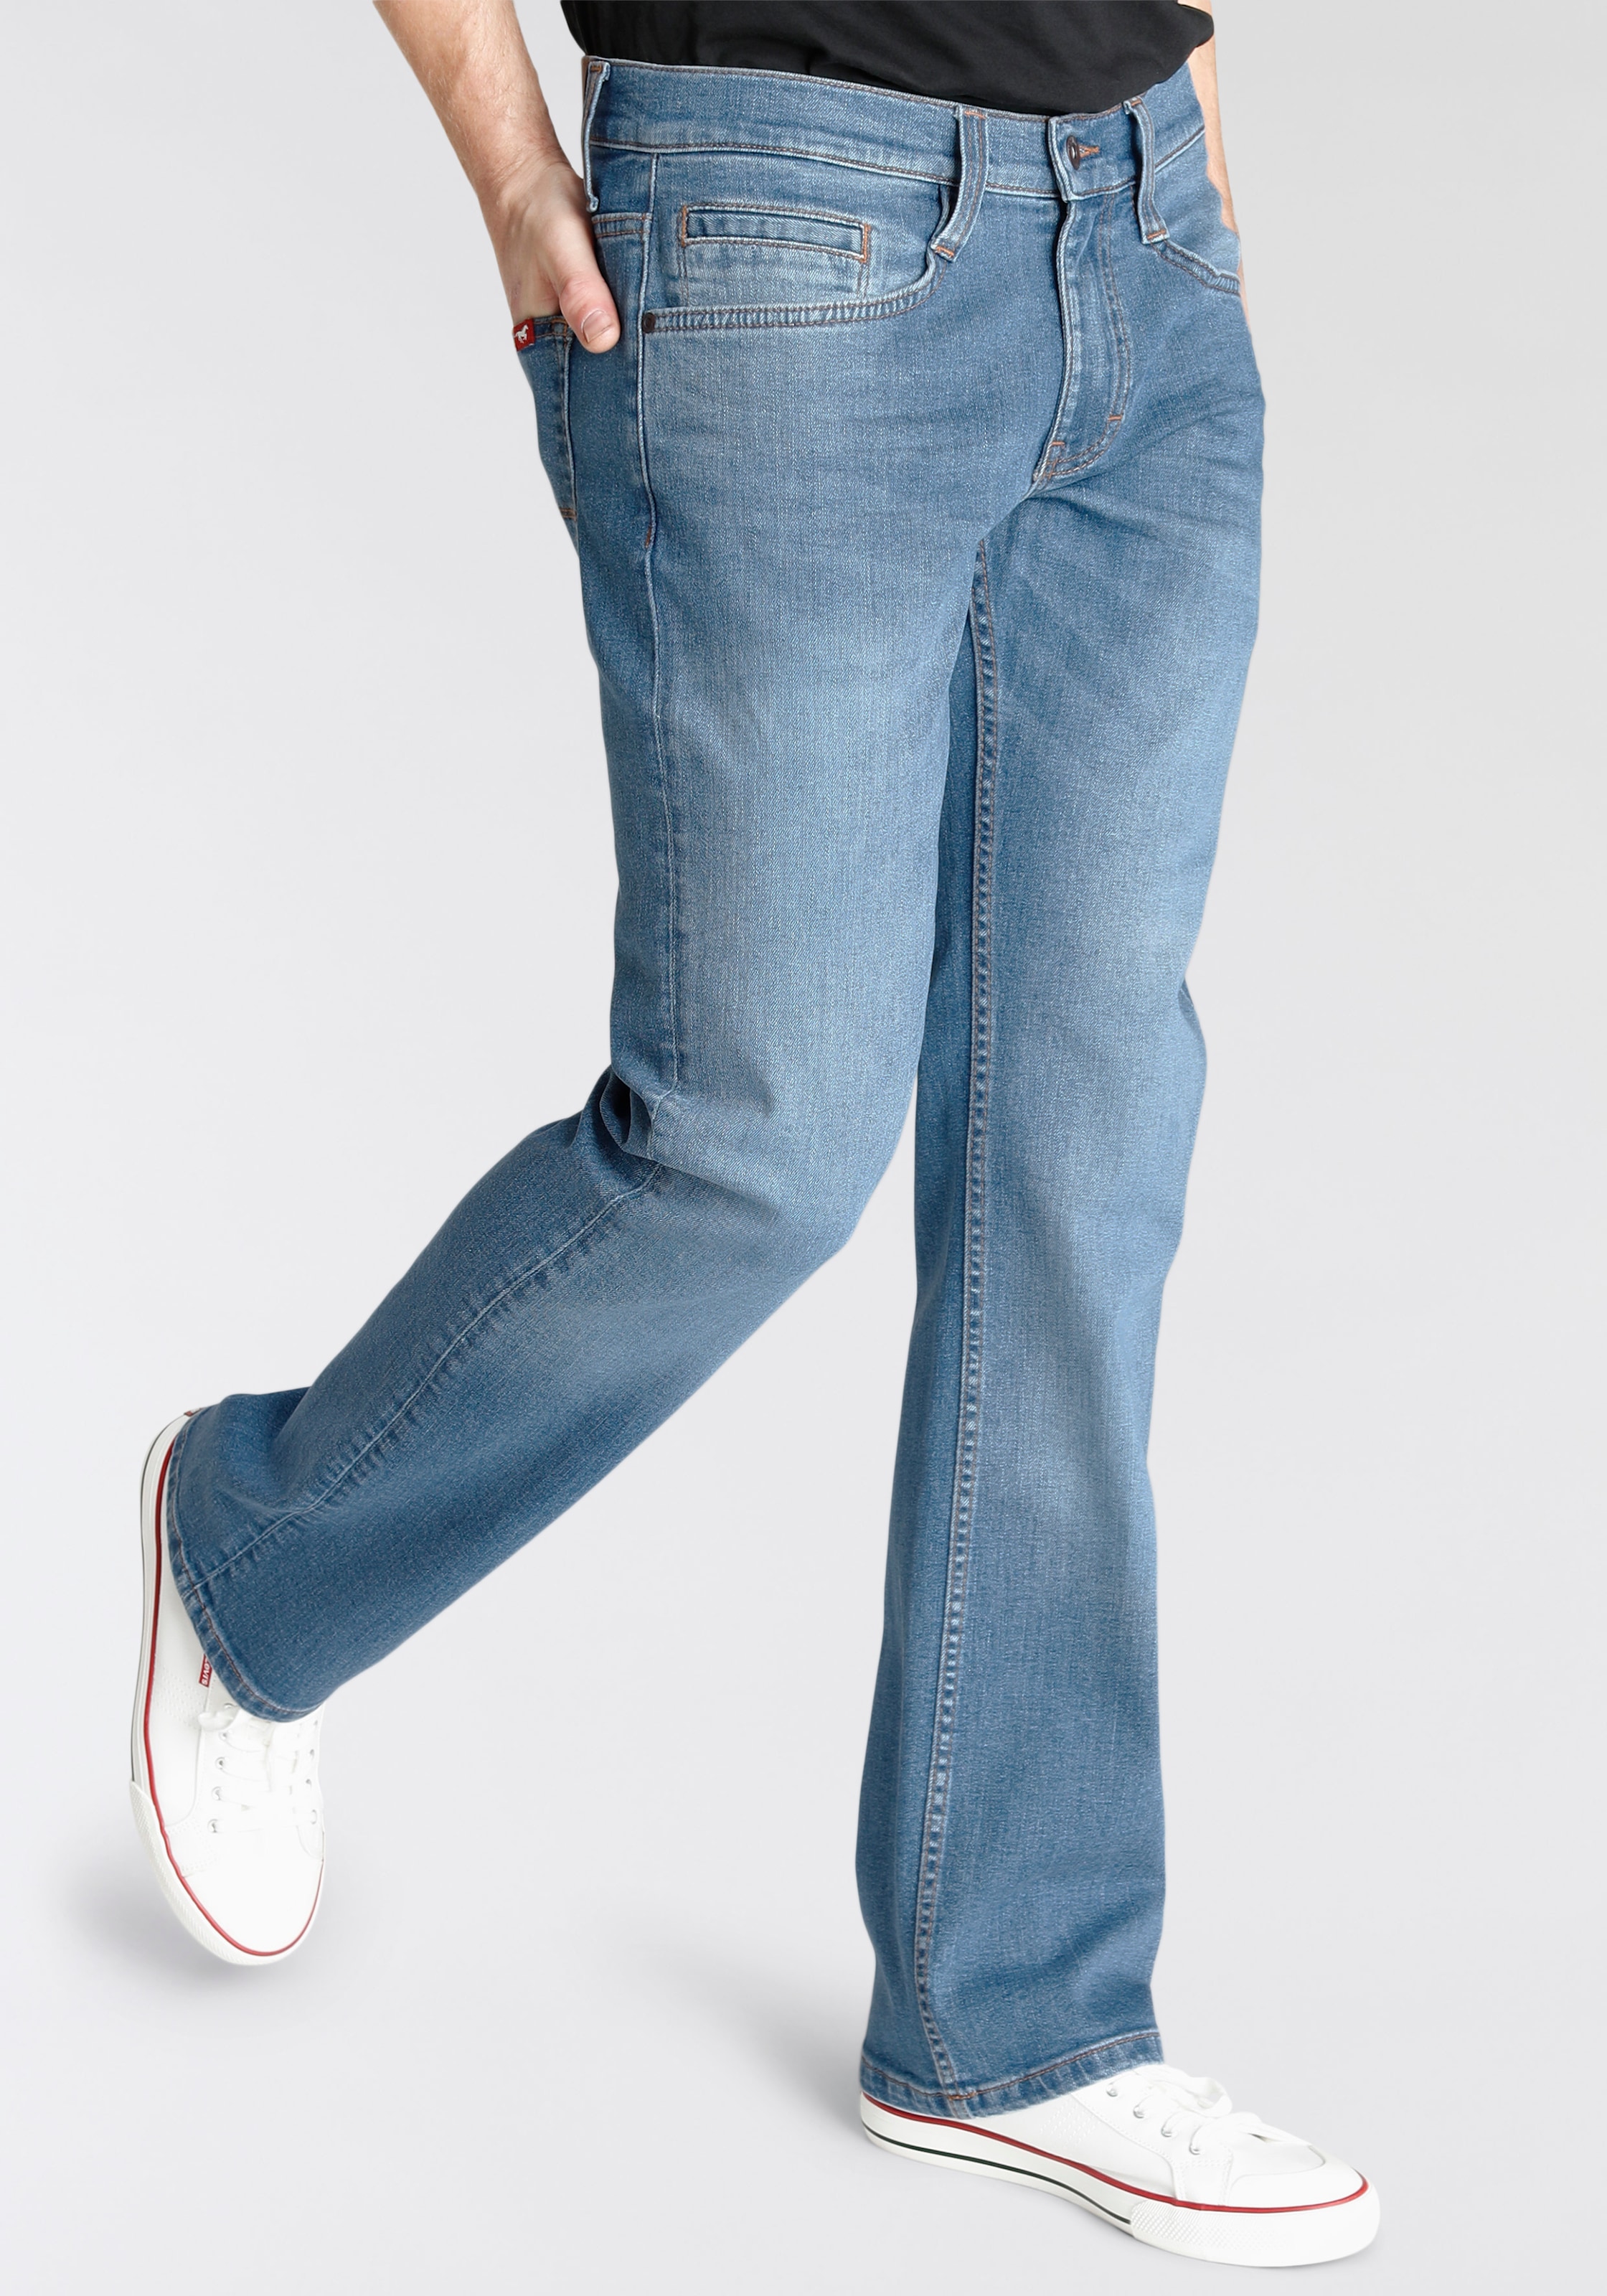 MUSTANG Bootcut-Jeans »STYLE OREGON BOOTCUT«